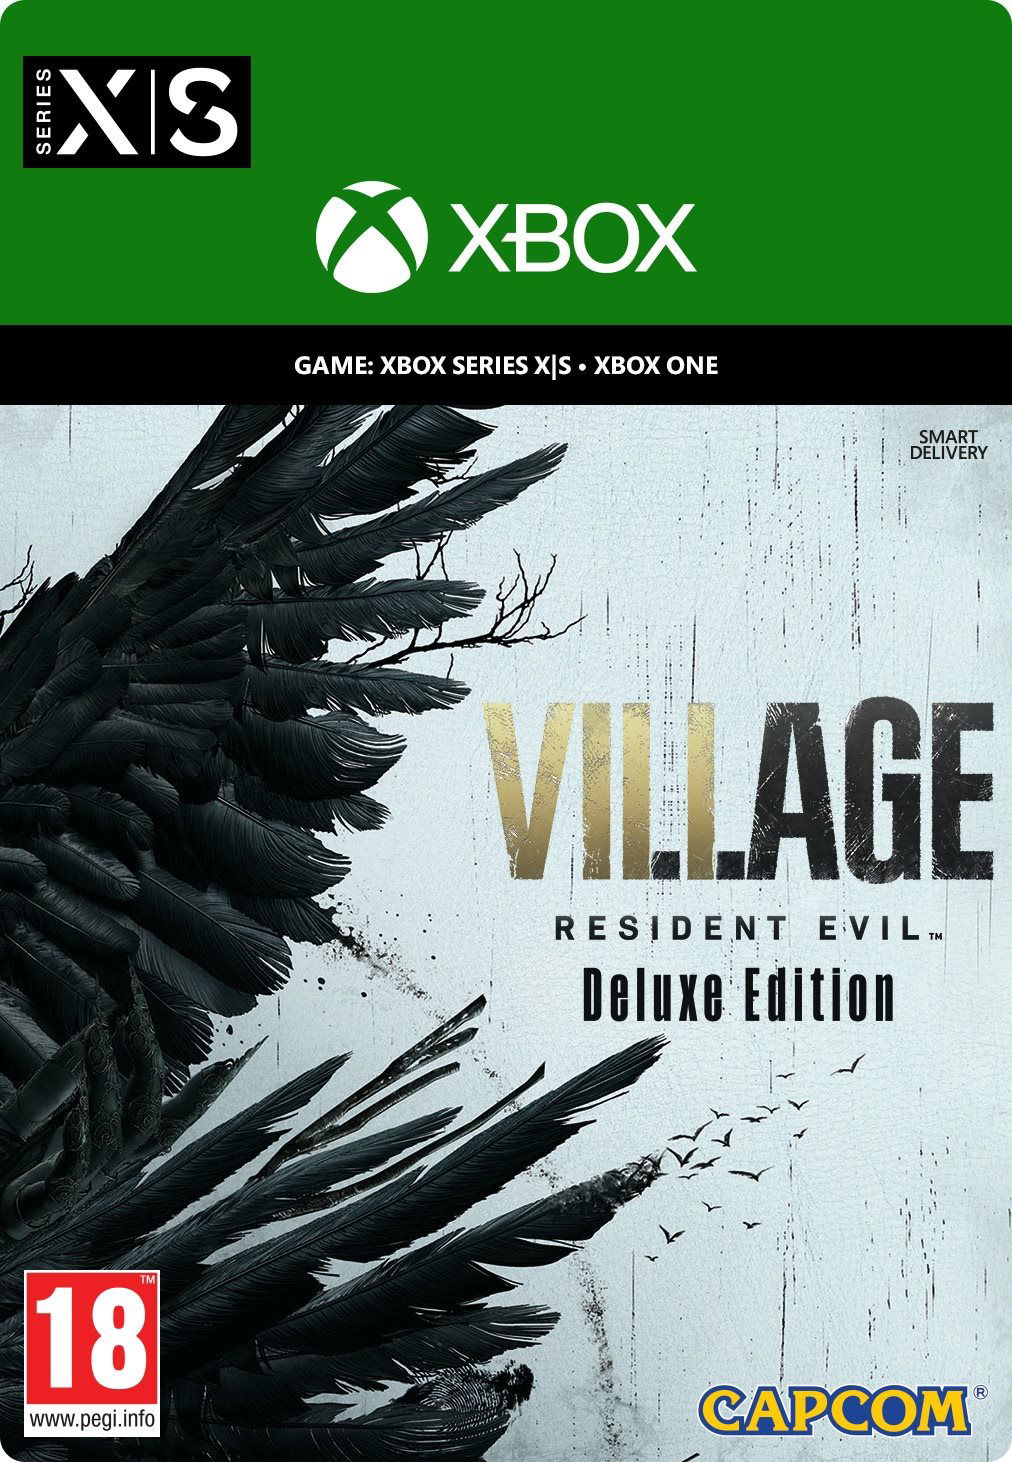 Console Game Resident Evil Village - Deluxe Edition - Xbox Digital